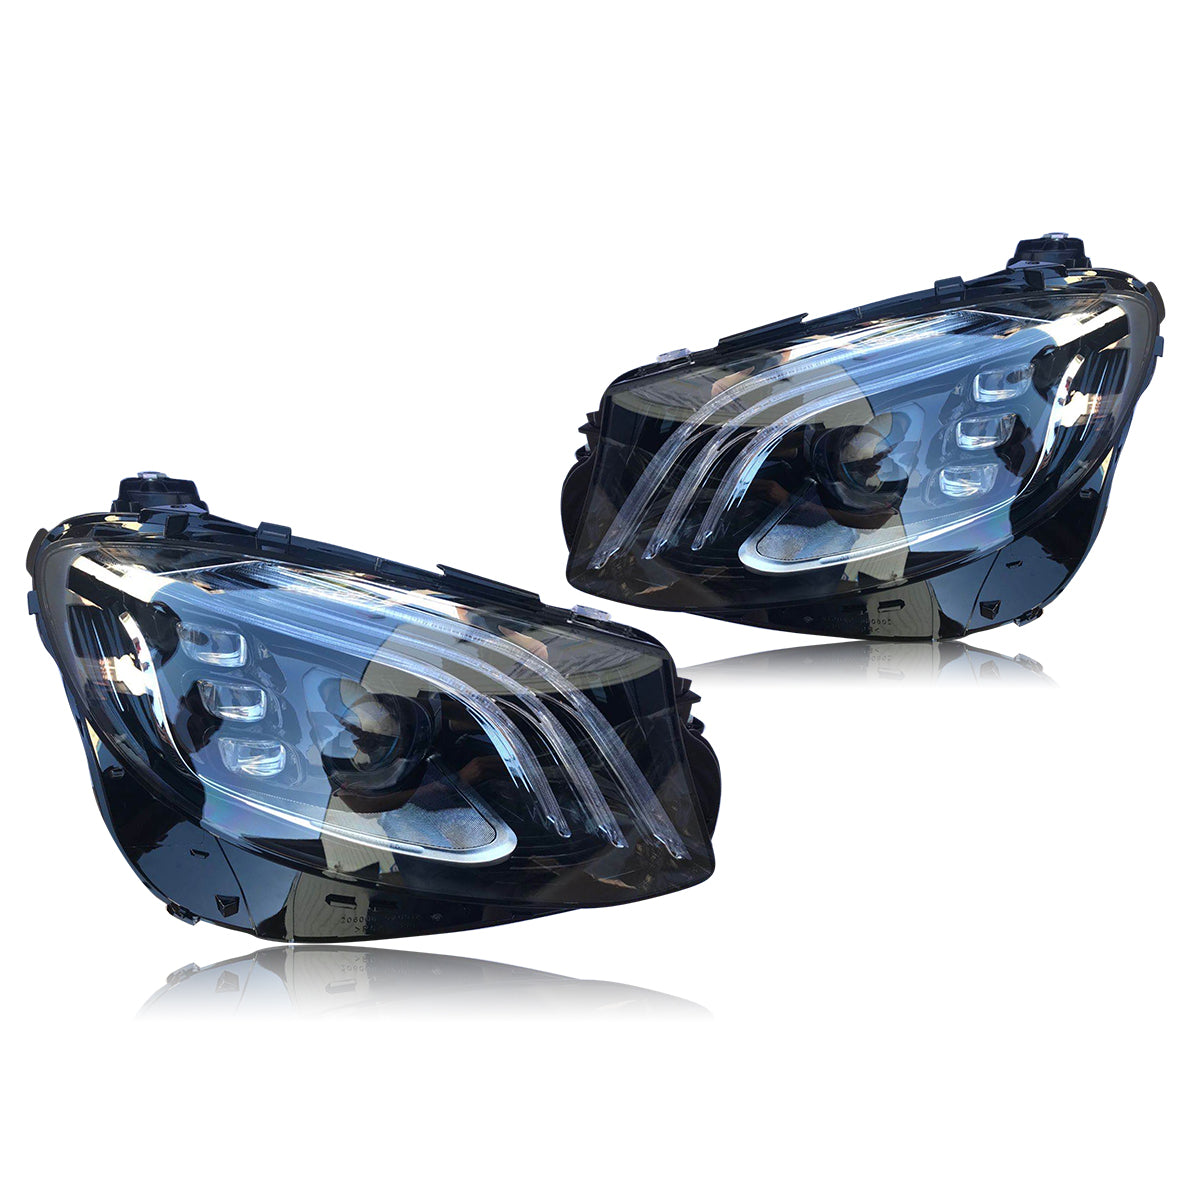 The headlight for W213 2016-2018 upgrade to W222 maybach style